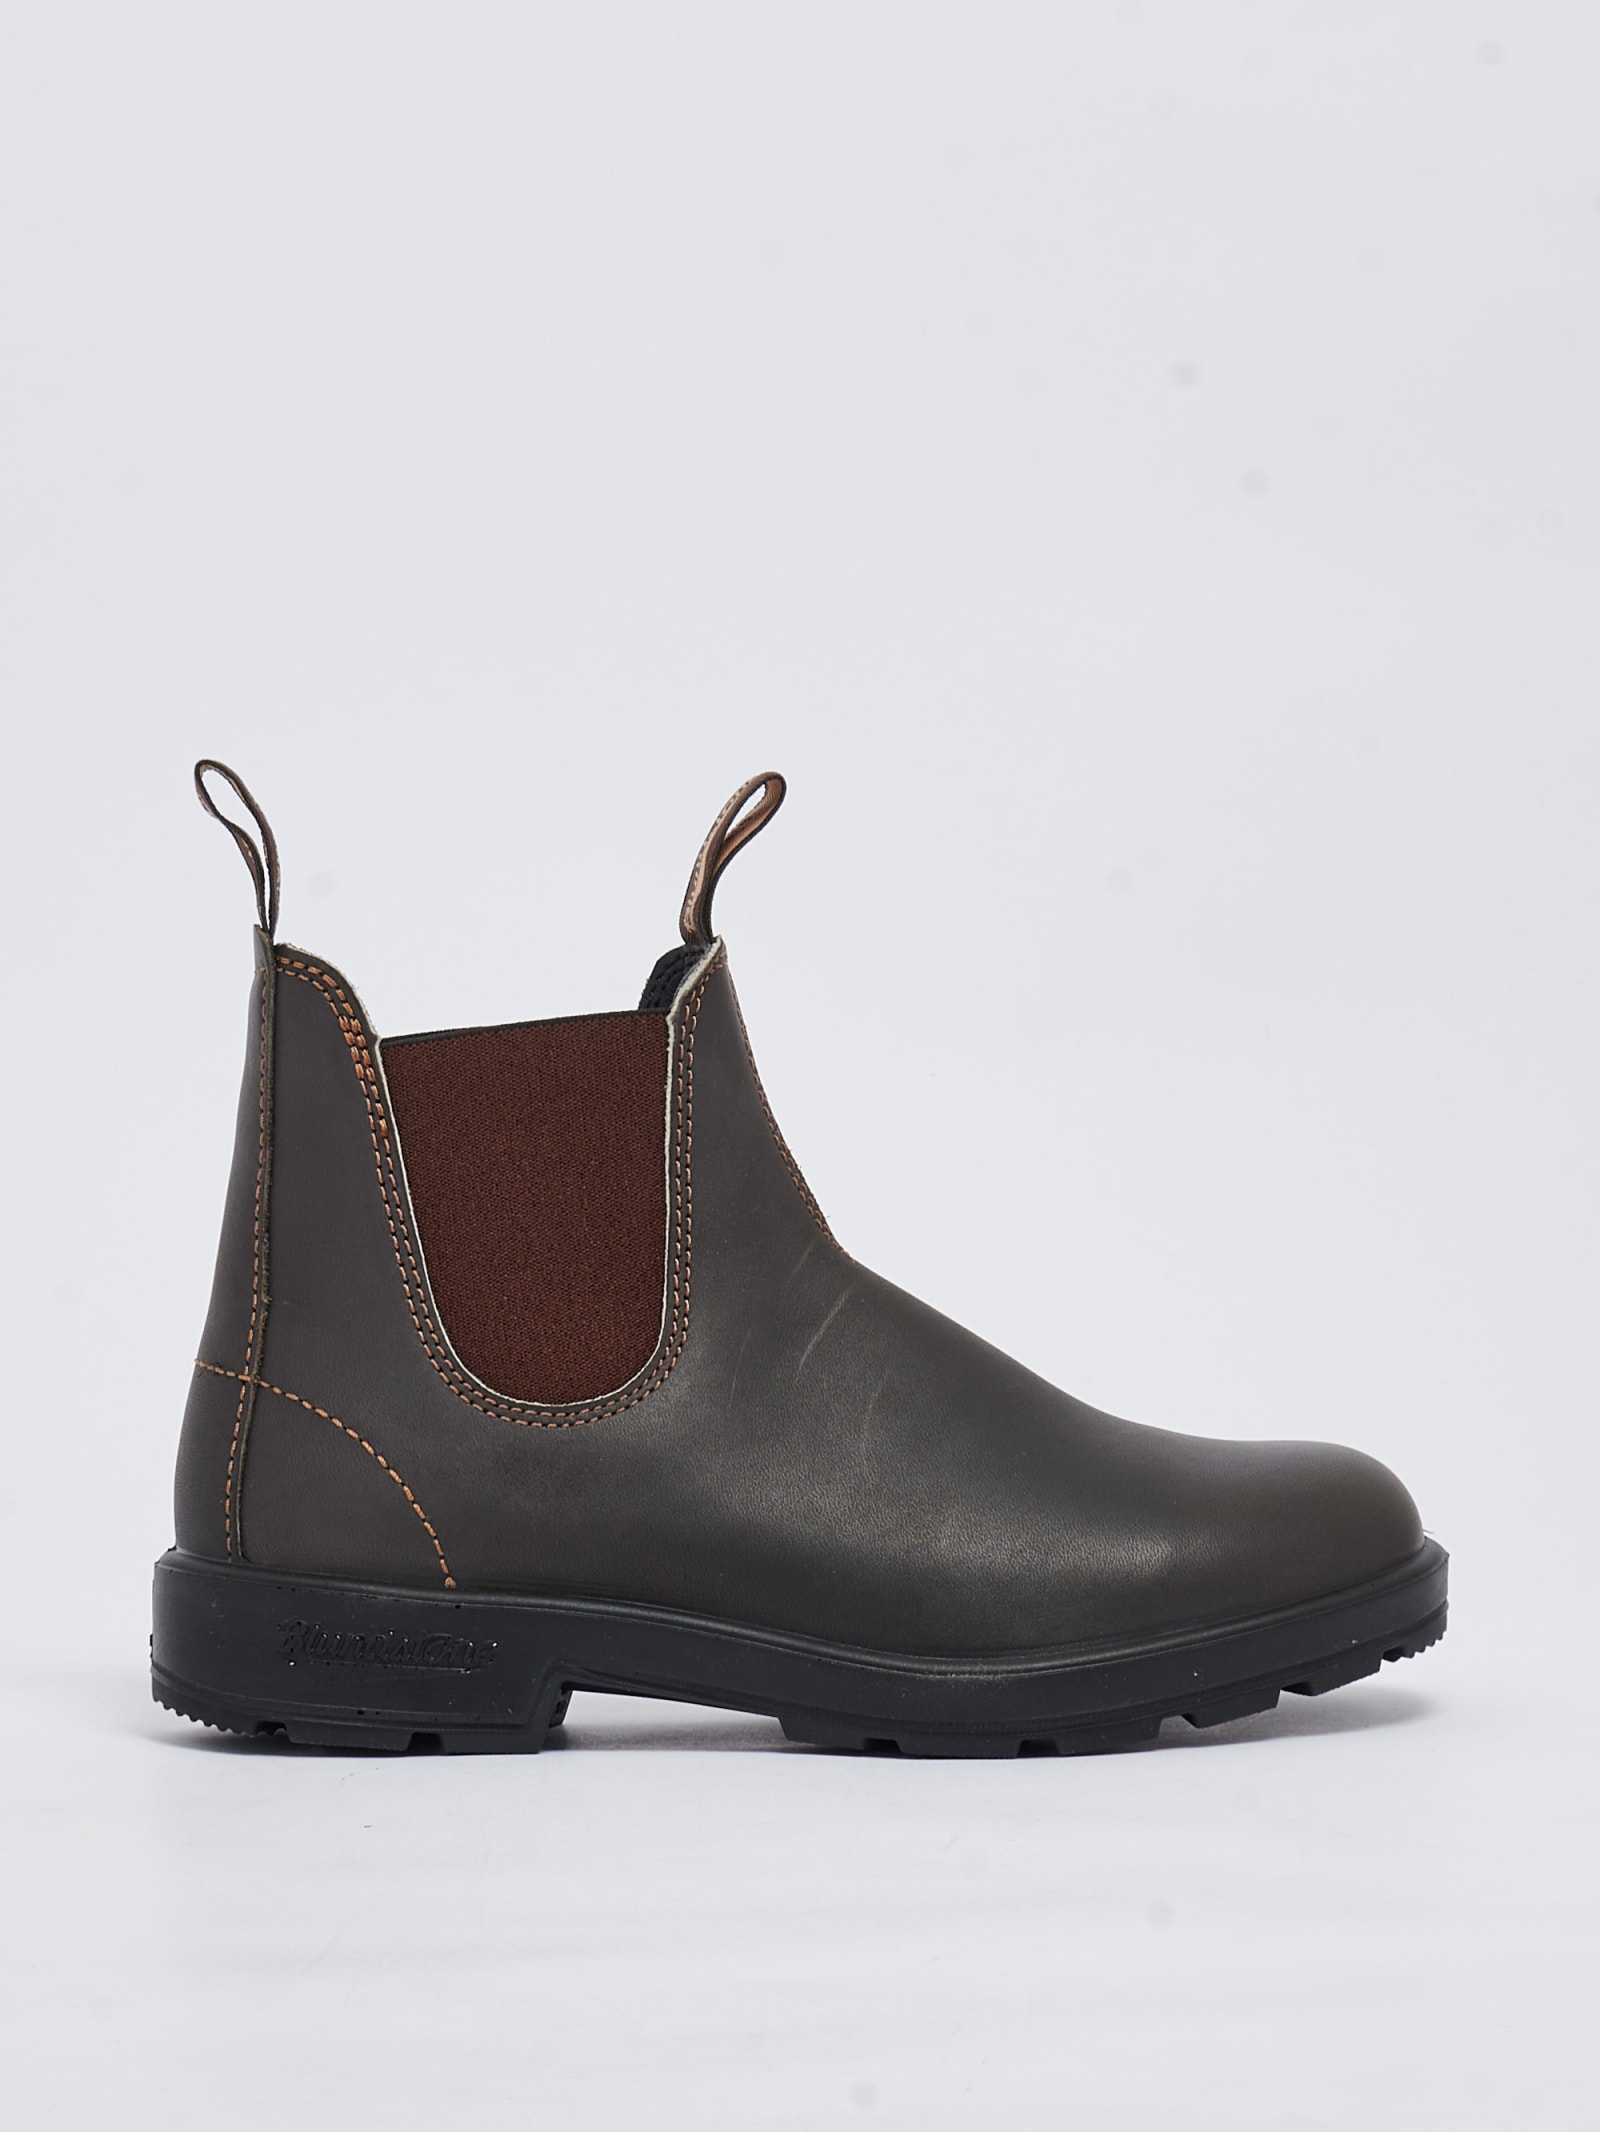 BLUNDSTONE 500 BLUNDSTONE COLLECTION BOOTS